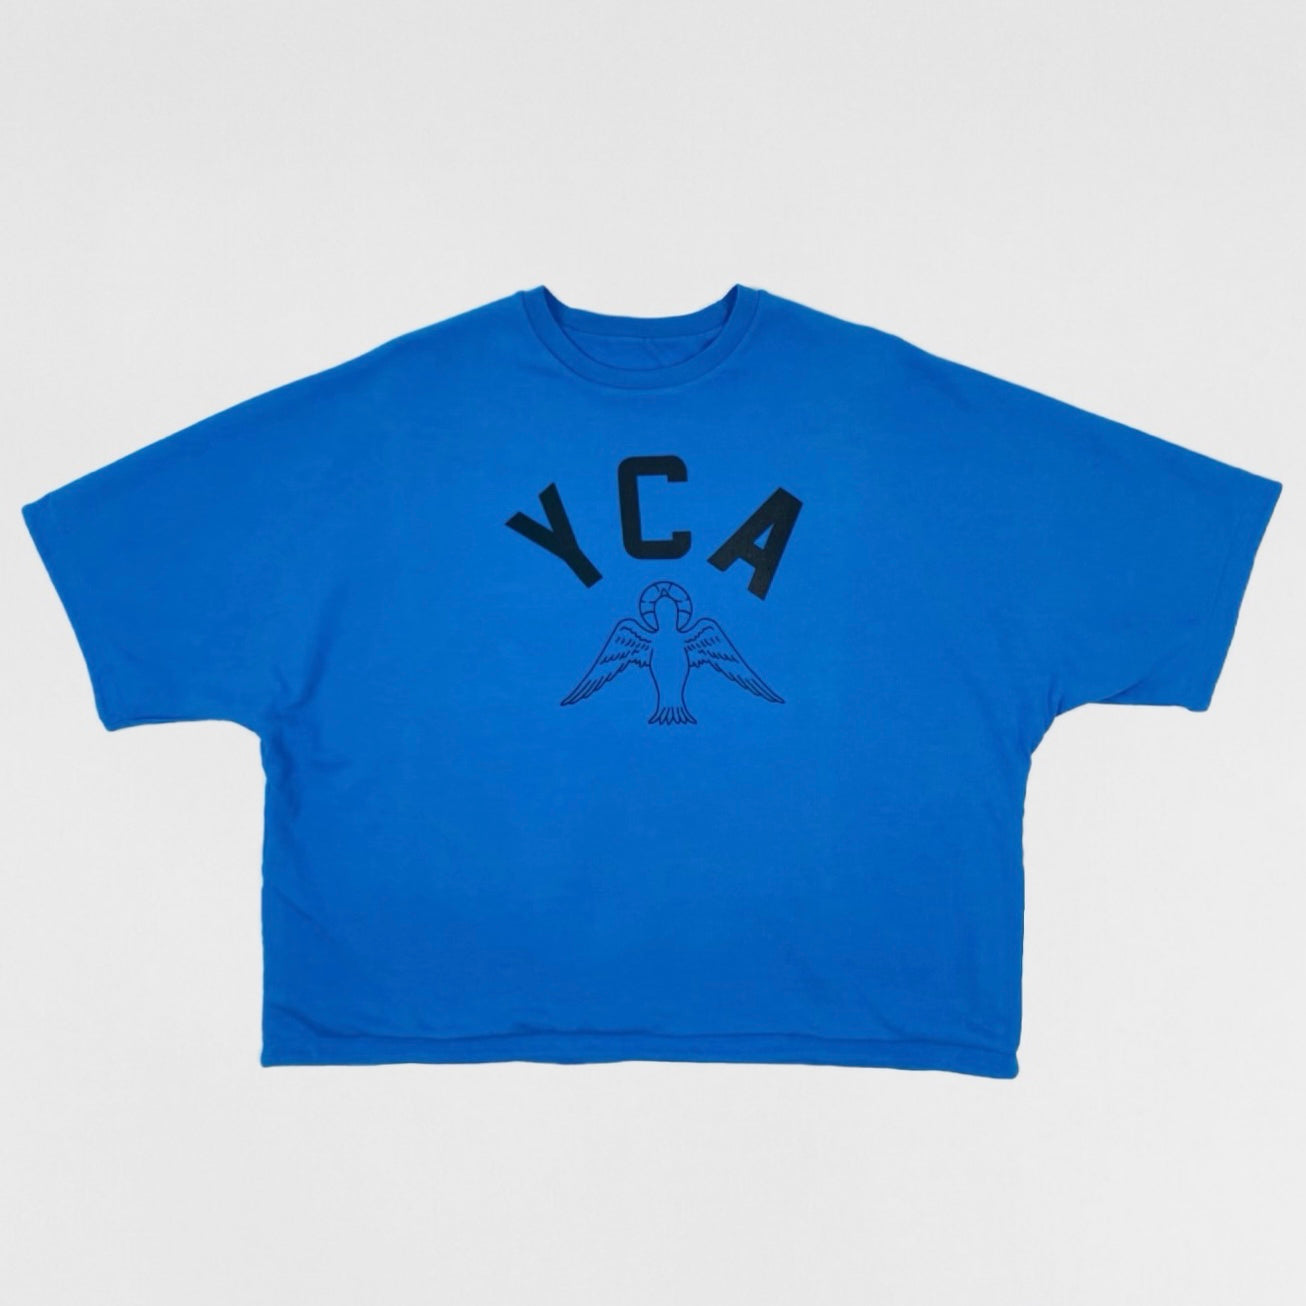 YZY 2020 Unreleased YCA Double Layered Shirt